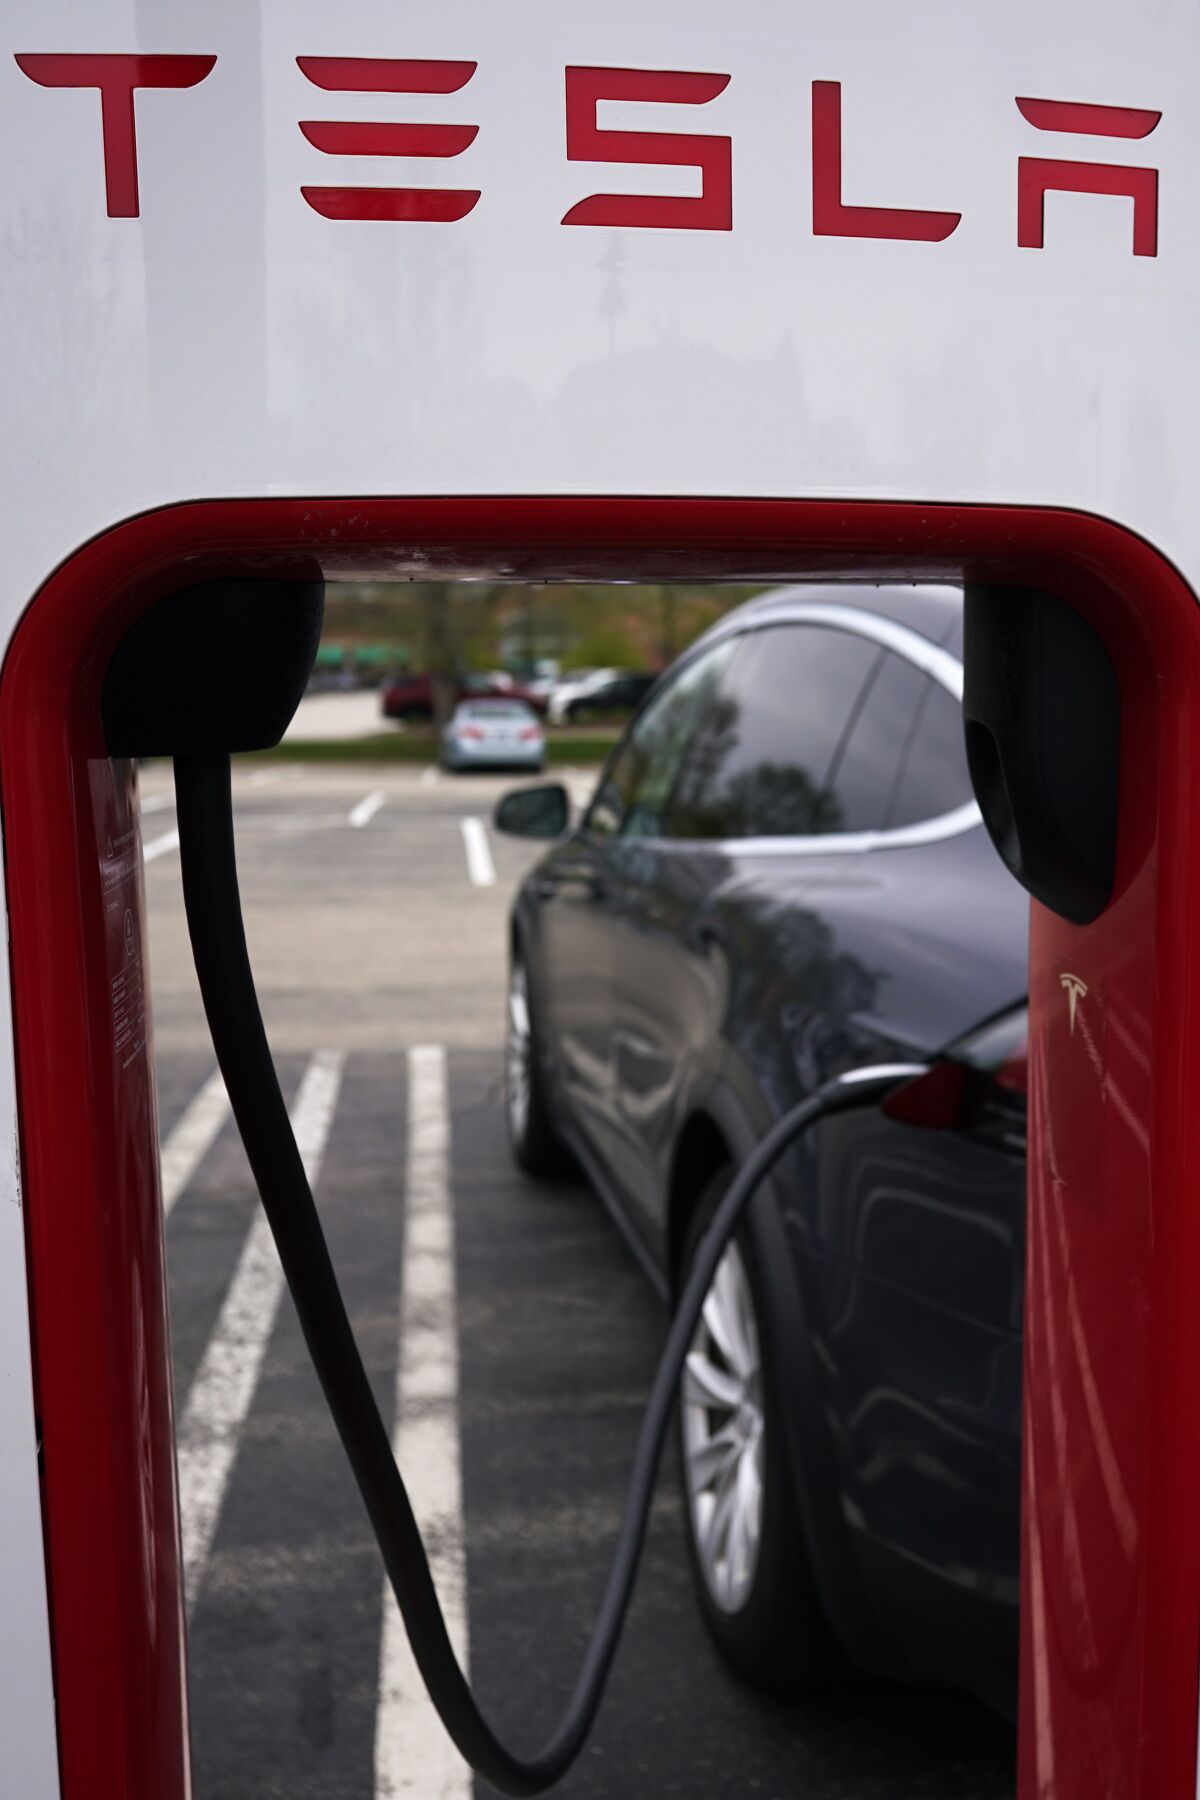 Tesla Supercharger is seen at Willow Festival shopping plaza parking lot in Northbrook, Ill., Thursday, May 5, 2022. Tesla is recalling about 130,000 vehicles across its U.S. model lineup, Tuesday, May 10, because the touch screens can overheat and go blank. The recall covers certain Model S sedan and Model X SUVs from 2021 and 2022, as well as Model 3 cars and Model Y SUVs from 2022. (AP Photo/Nam Y. Huh)